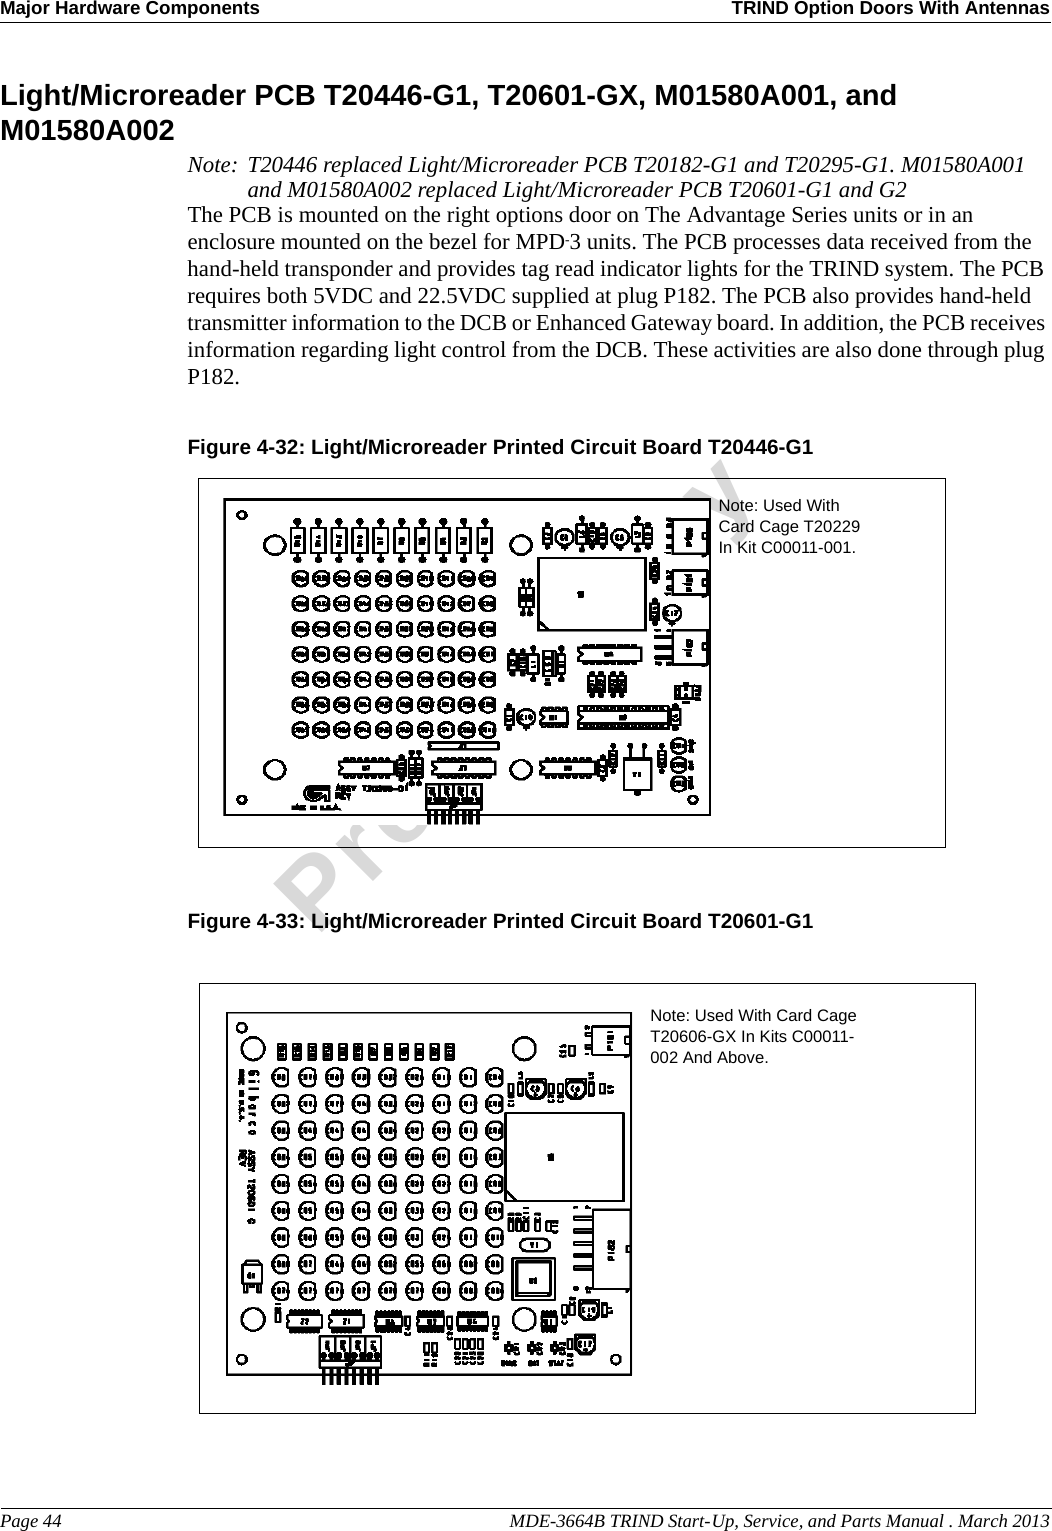 Major Hardware Components TRIND Option Doors With AntennasPage 44                                                                                                  MDE-3664B TRIND Start-Up, Service, and Parts Manual . March 2013PreliminaryLight/Microreader PCB T20446-G1, T20601-GX, M01580A001, and M01580A002 Note: T20446 replaced Light/Microreader PCB T20182-G1 and T20295-G1. M01580A001 and M01580A002 replaced Light/Microreader PCB T20601-G1 and G2The PCB is mounted on the right options door on The Advantage Series units or in an enclosure mounted on the bezel for MPD-3 units. The PCB processes data received from the hand-held transponder and provides tag read indicator lights for the TRIND system. The PCB requires both 5VDC and 22.5VDC supplied at plug P182. The PCB also provides hand-held transmitter information to the DCB or Enhanced Gateway board. In addition, the PCB receives information regarding light control from the DCB. These activities are also done through plug P182.Figure 4-32: Light/Microreader Printed Circuit Board T20446-G1Note: Used With Card Cage T20229 In Kit C00011-001.Figure 4-33: Light/Microreader Printed Circuit Board T20601-G1Note: Used With Card Cage T20606-GX In Kits C00011-002 And Above.